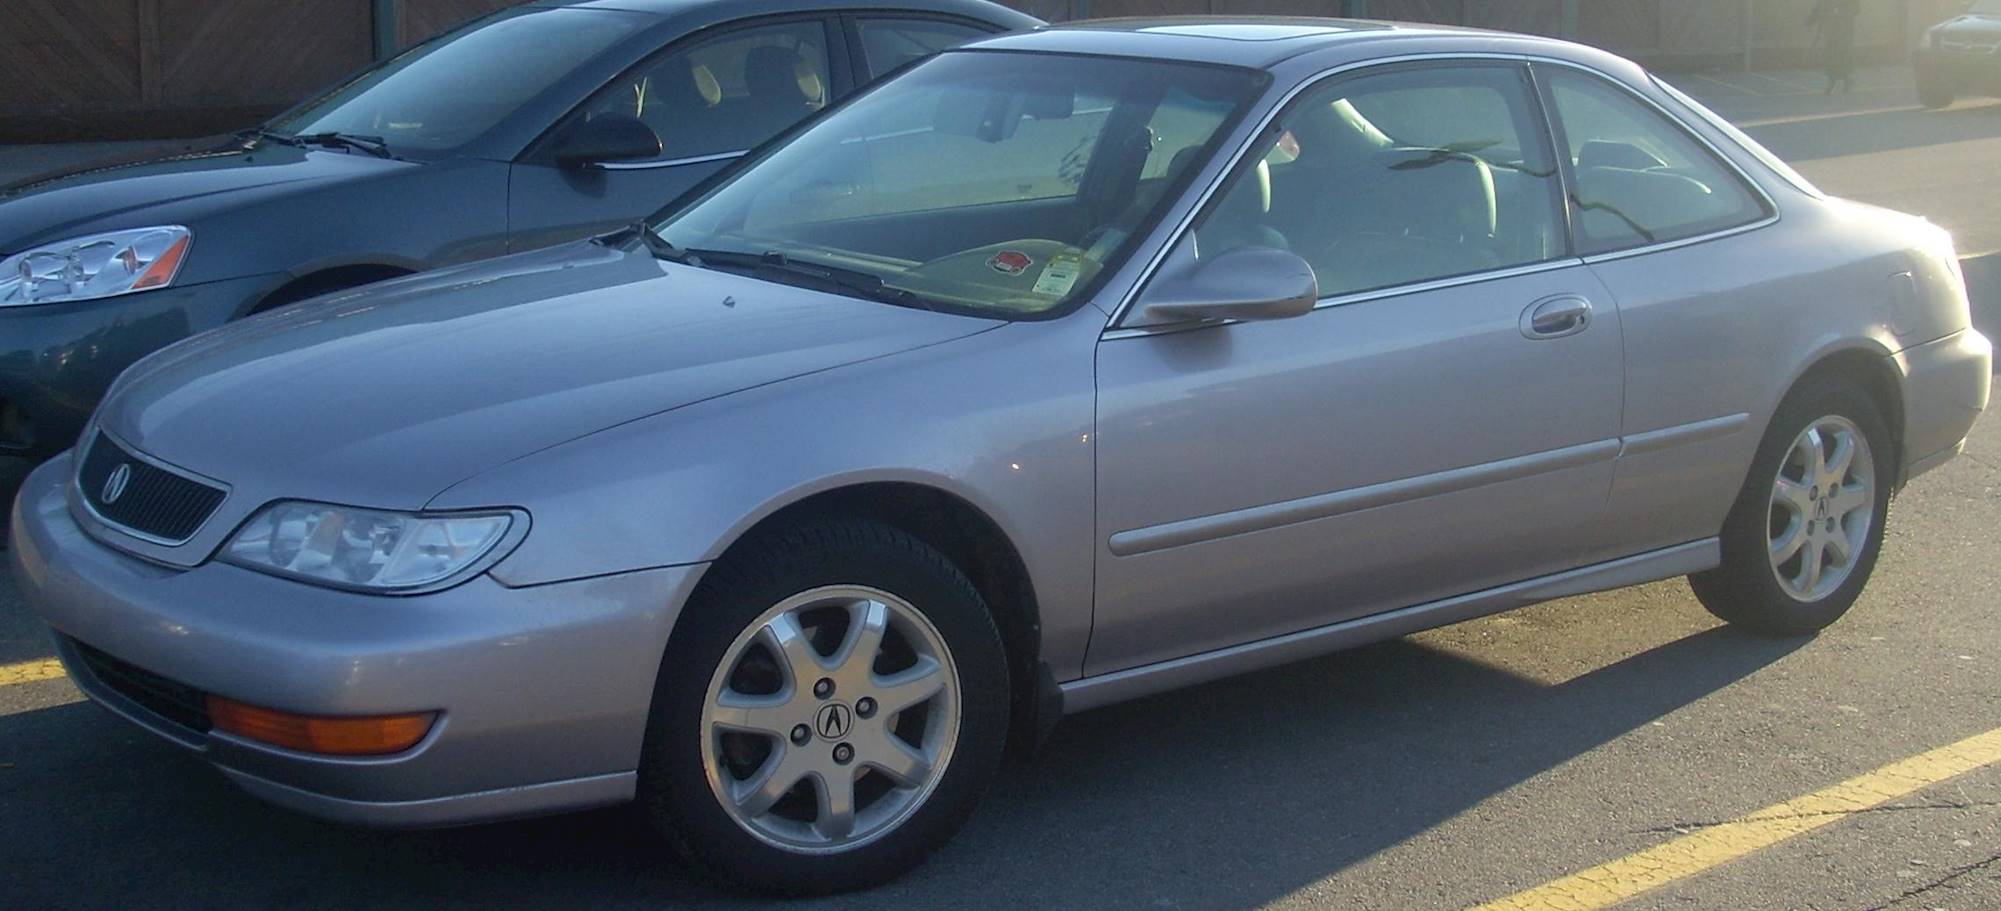 1998 Acura CL 2-Door Coupe 2.3L Automatic Base None